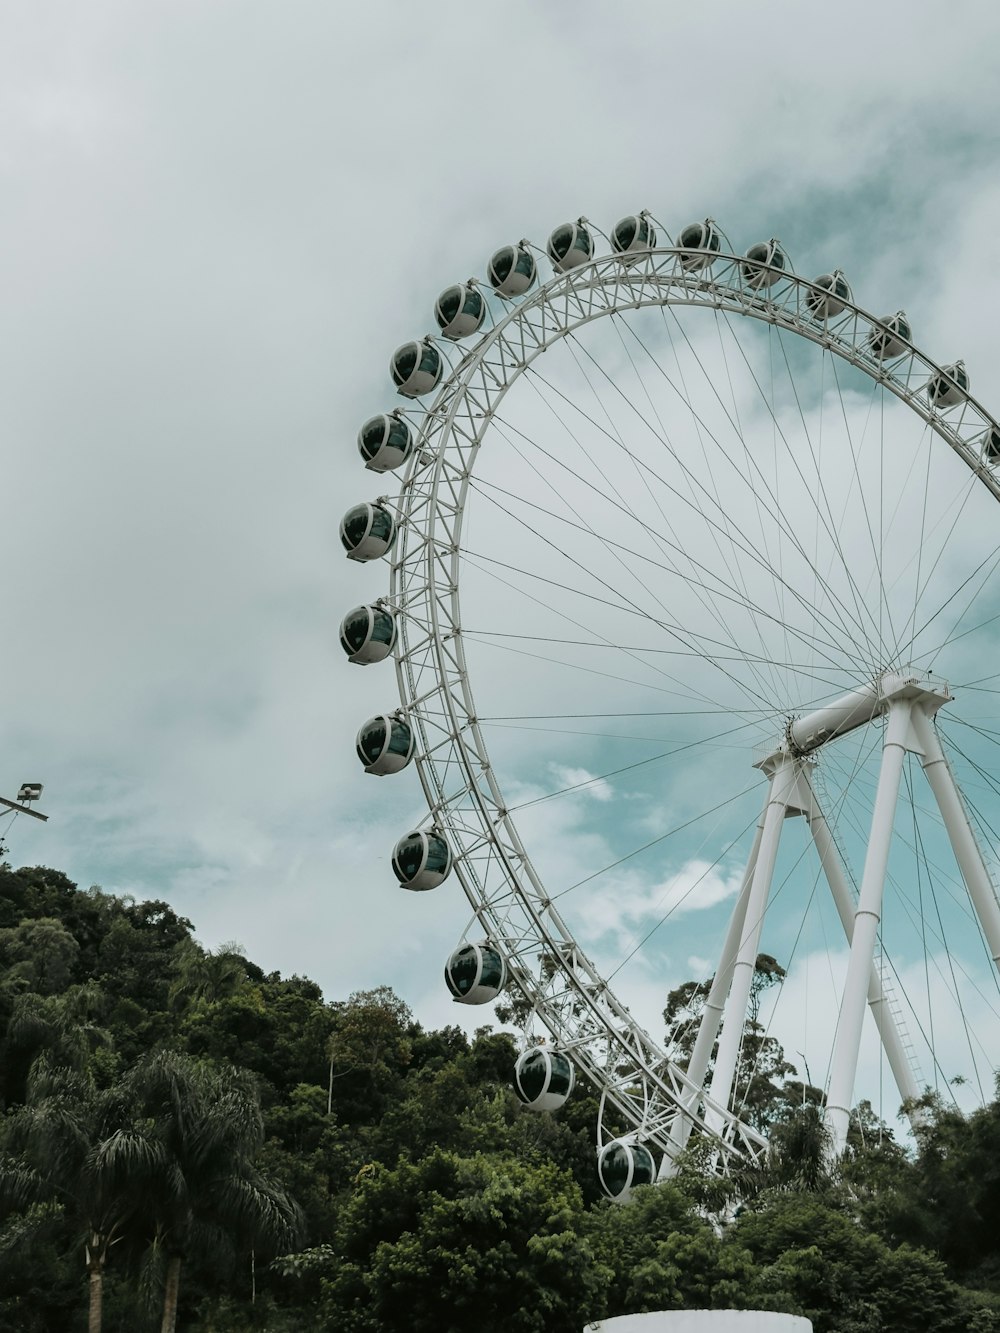 a large ferris wheel on a cloudy day